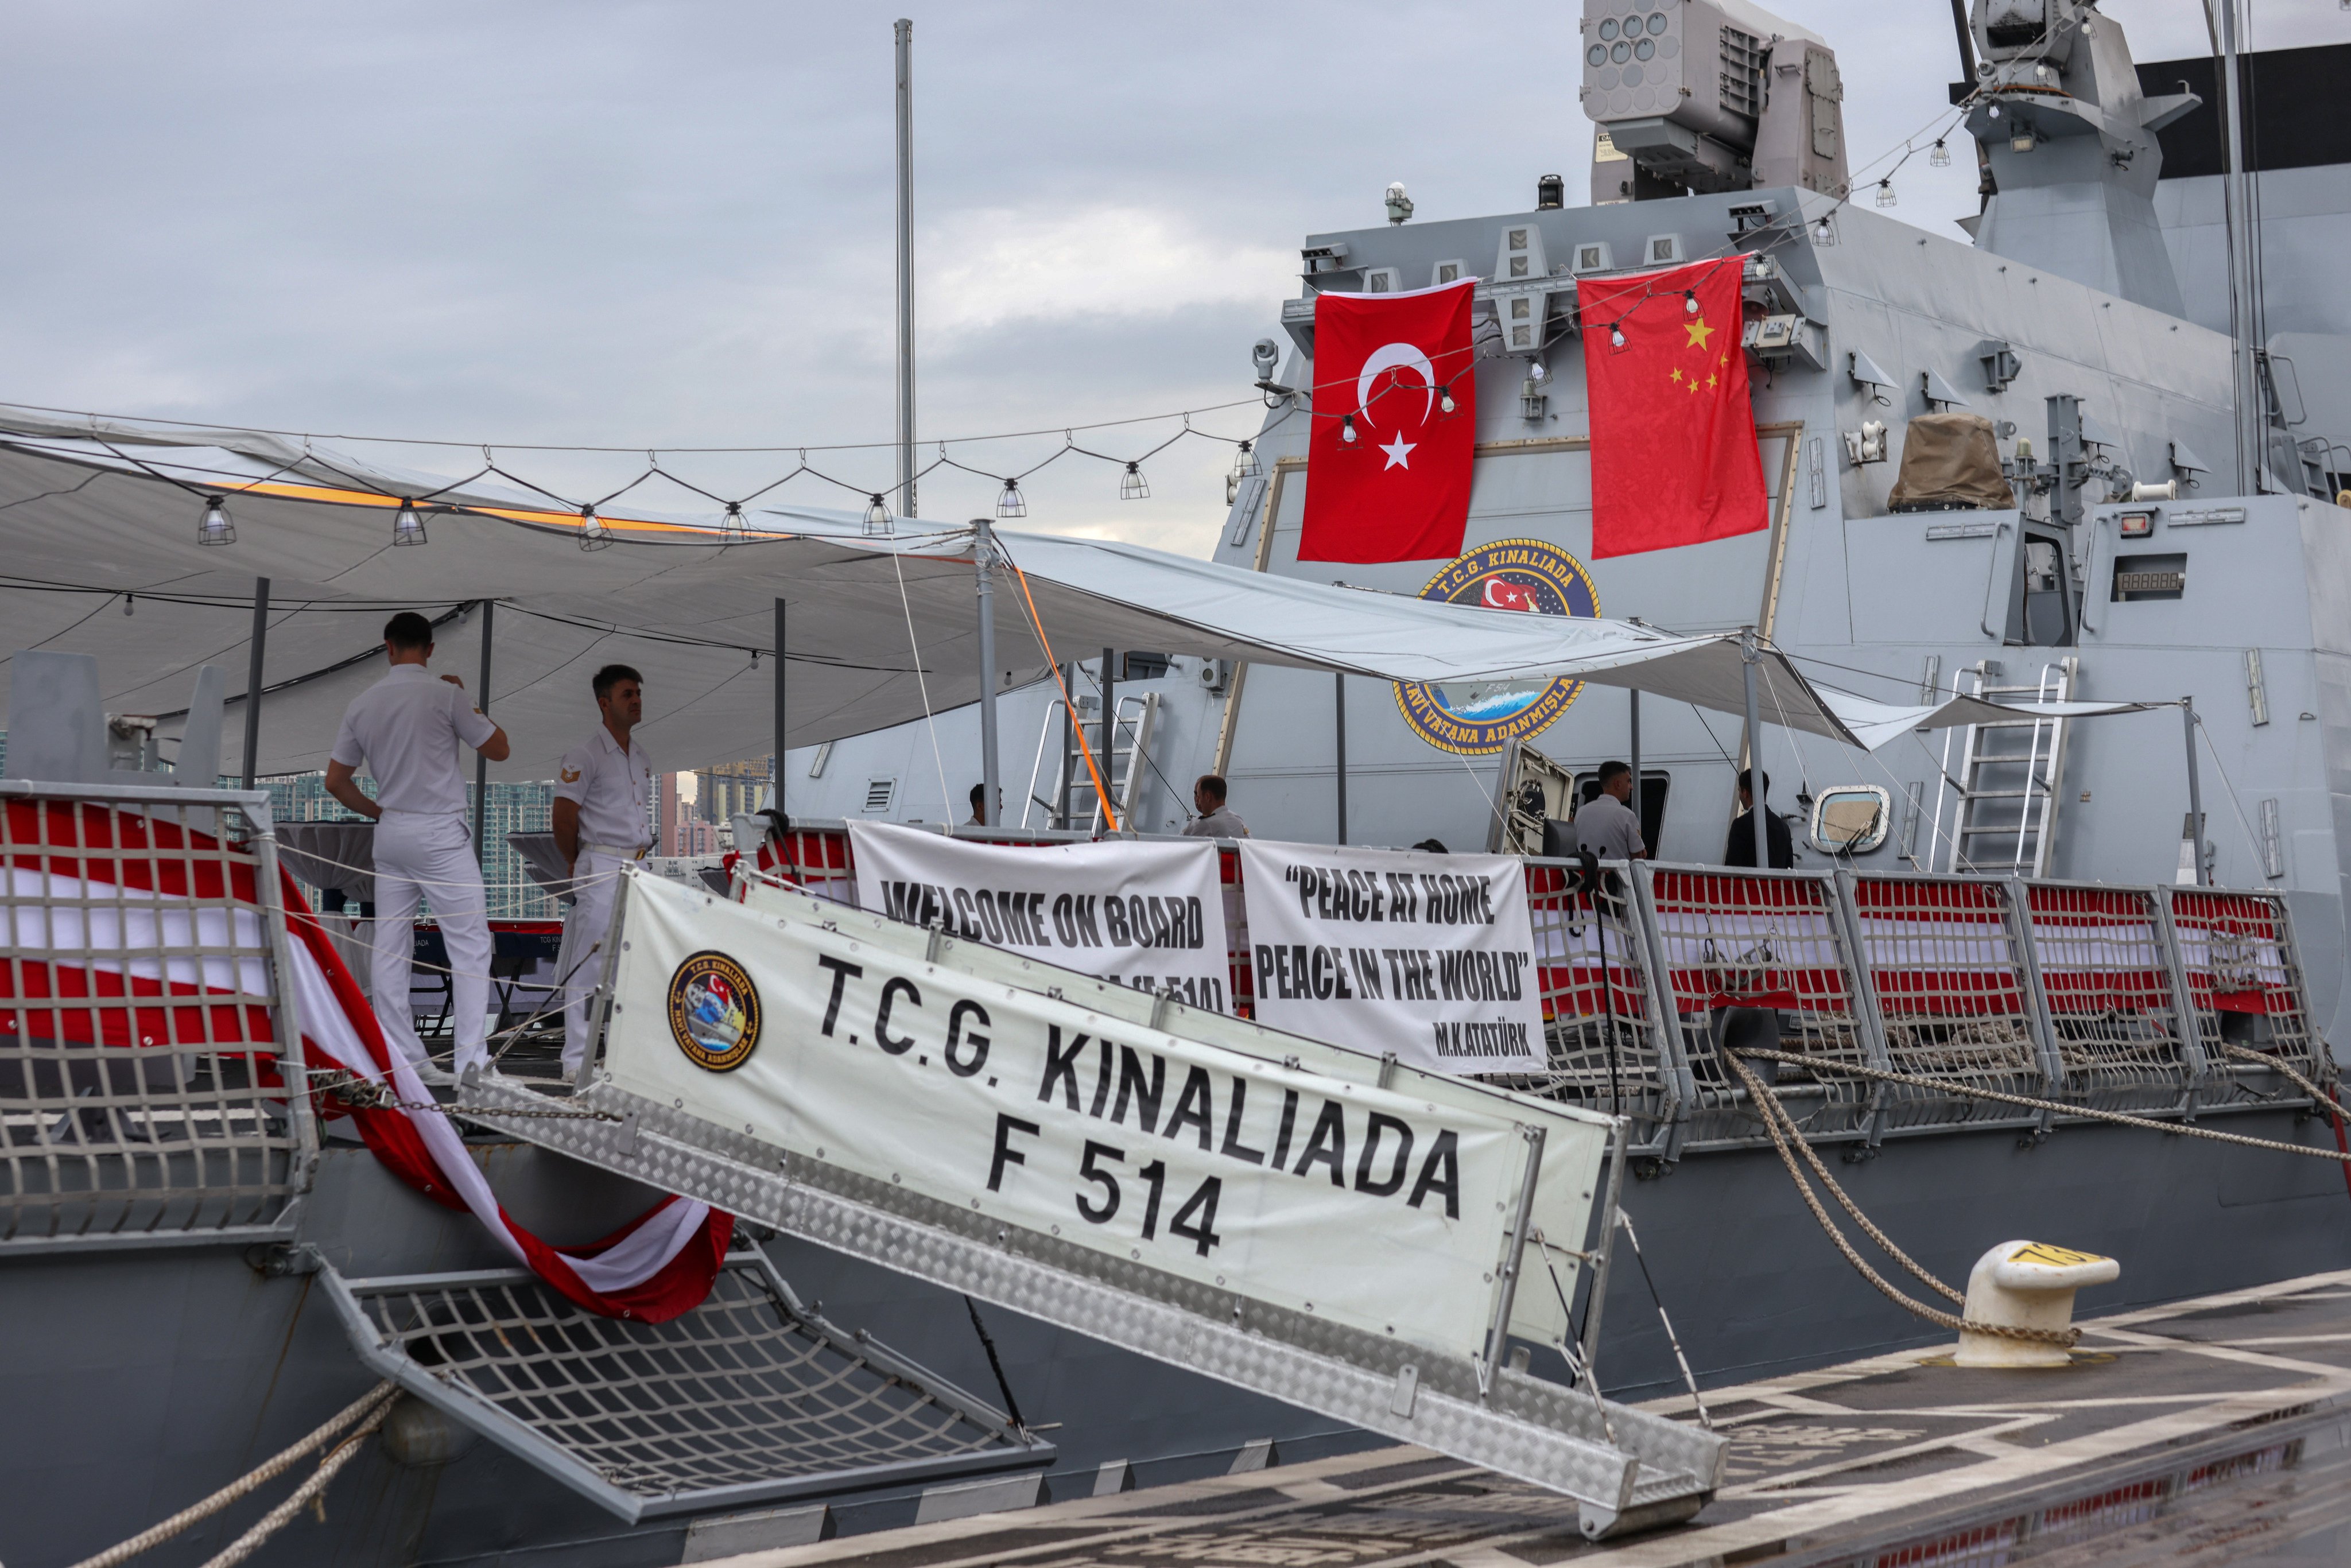 TCG Kinaliada is the first warship equipped with Turkey’s home-grown anti-ship guided missile, “ATMACA”, made by defence company Roketsan. Photo: Yik Yeung-man